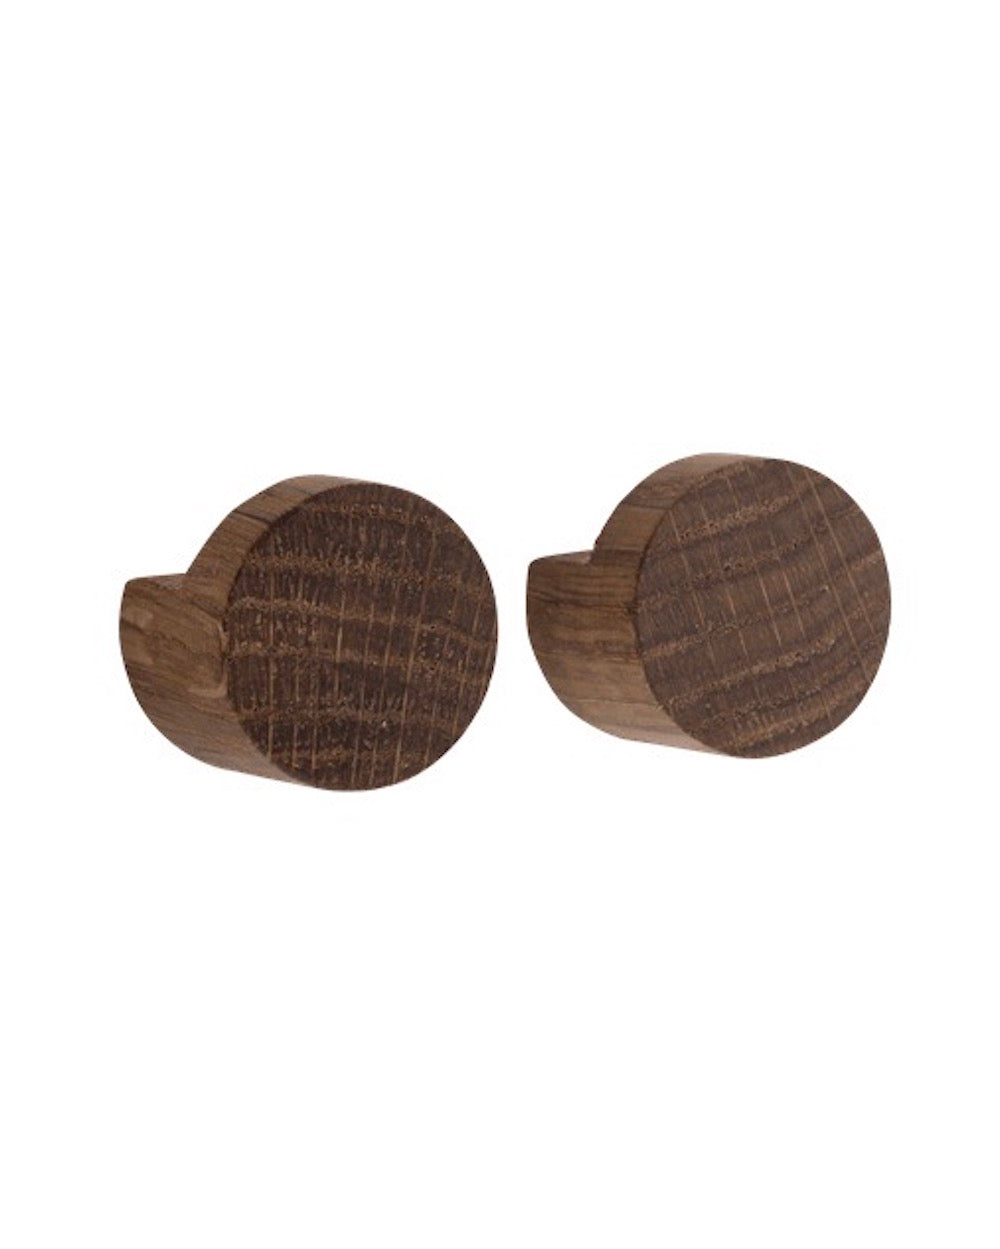 byWirth - Haken WOOD KNOT small - 2er Set